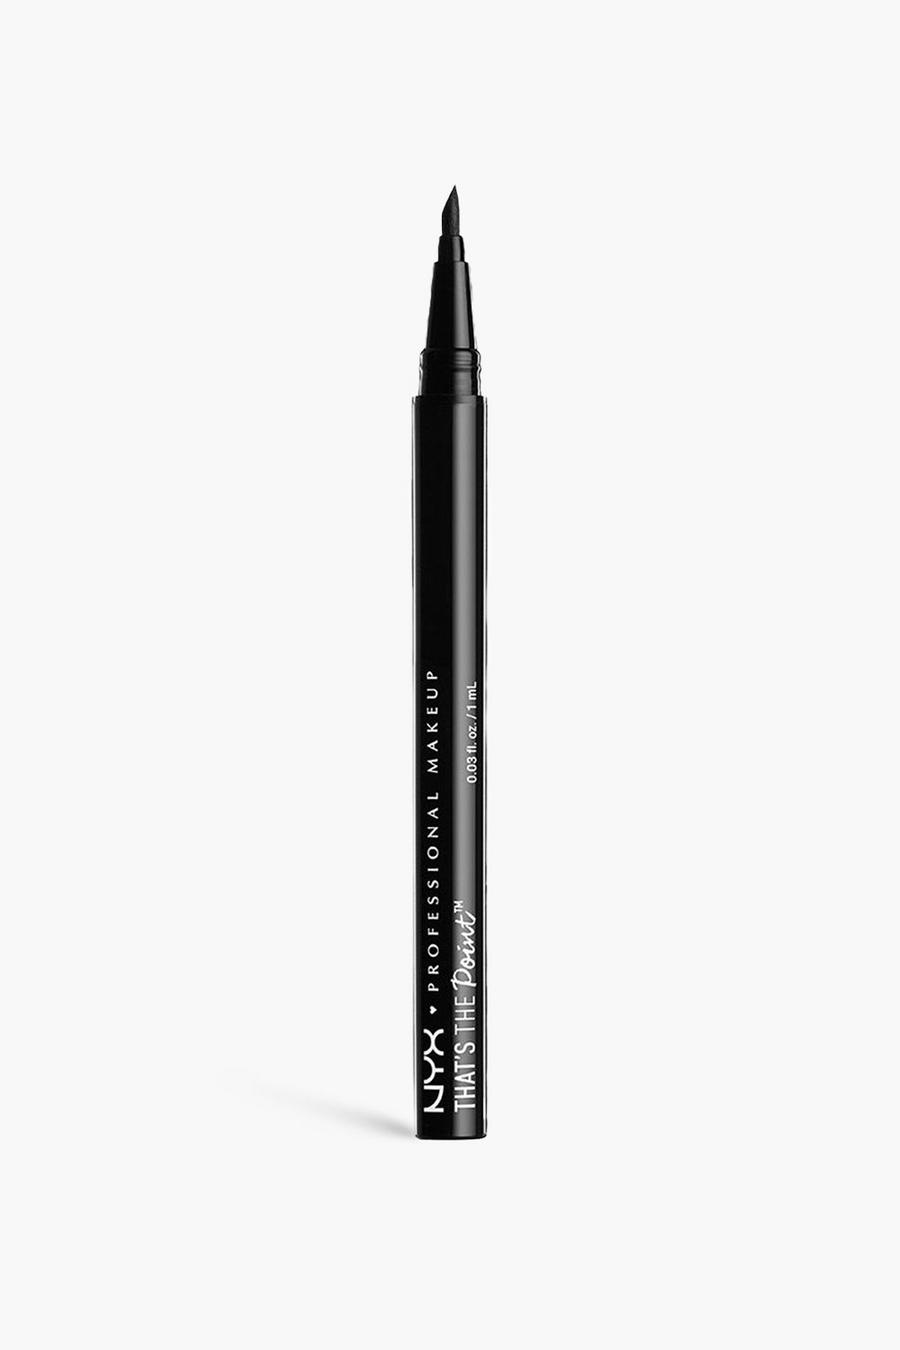 NYX Professional Makeup - Eyeliner That's The Point, Hella fine